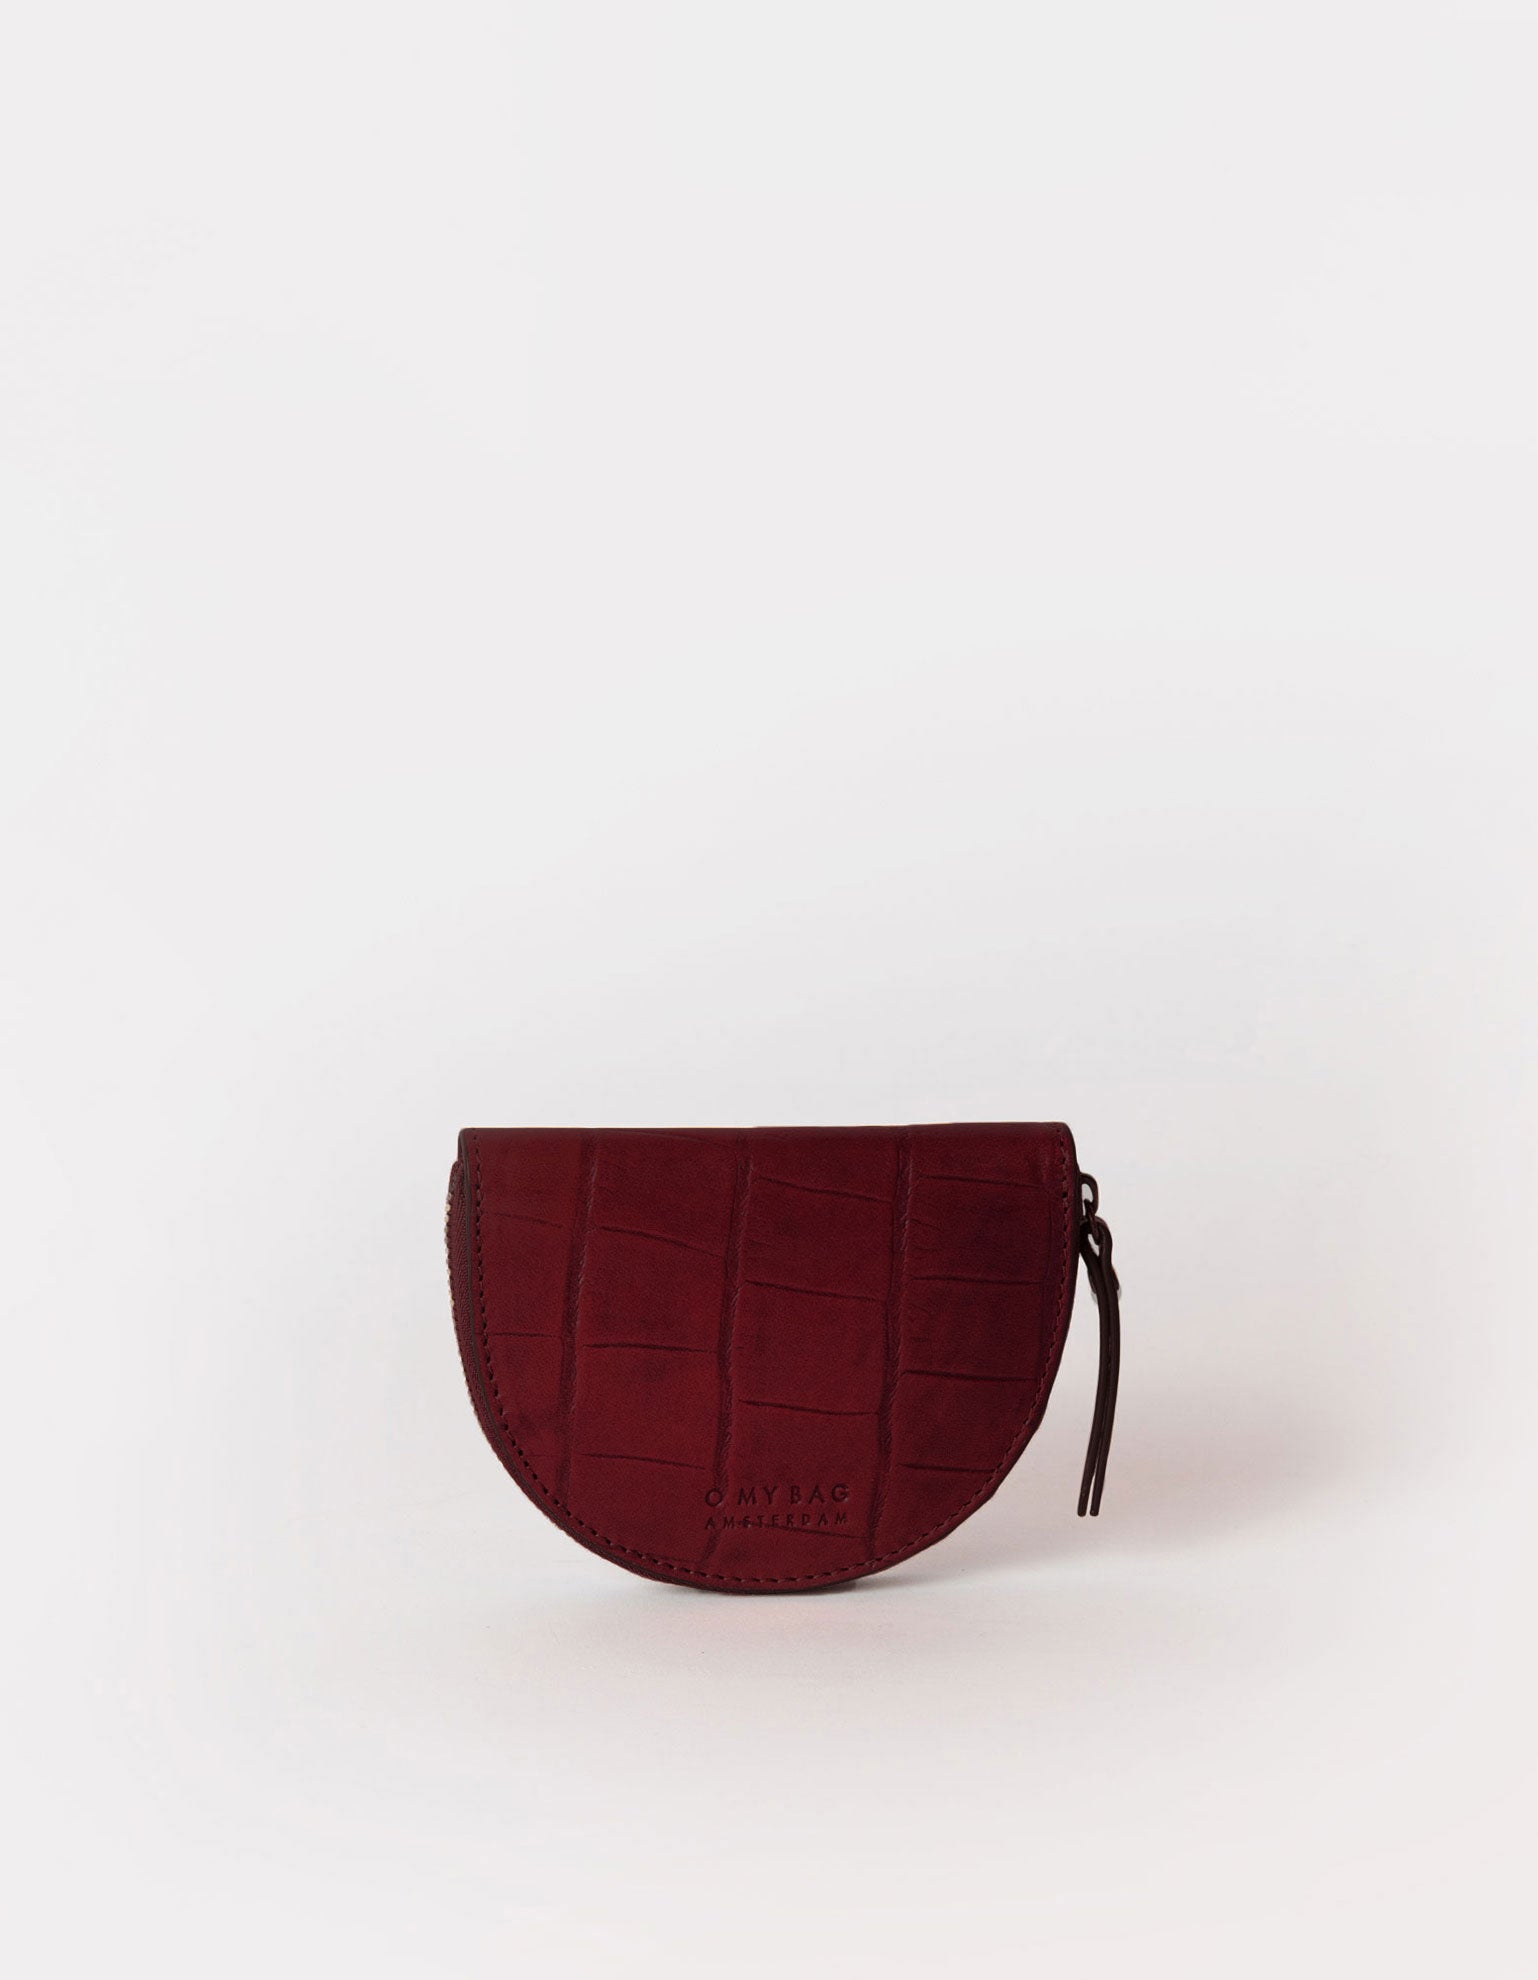 Laura coin purse - dark ruby classic leather - product image